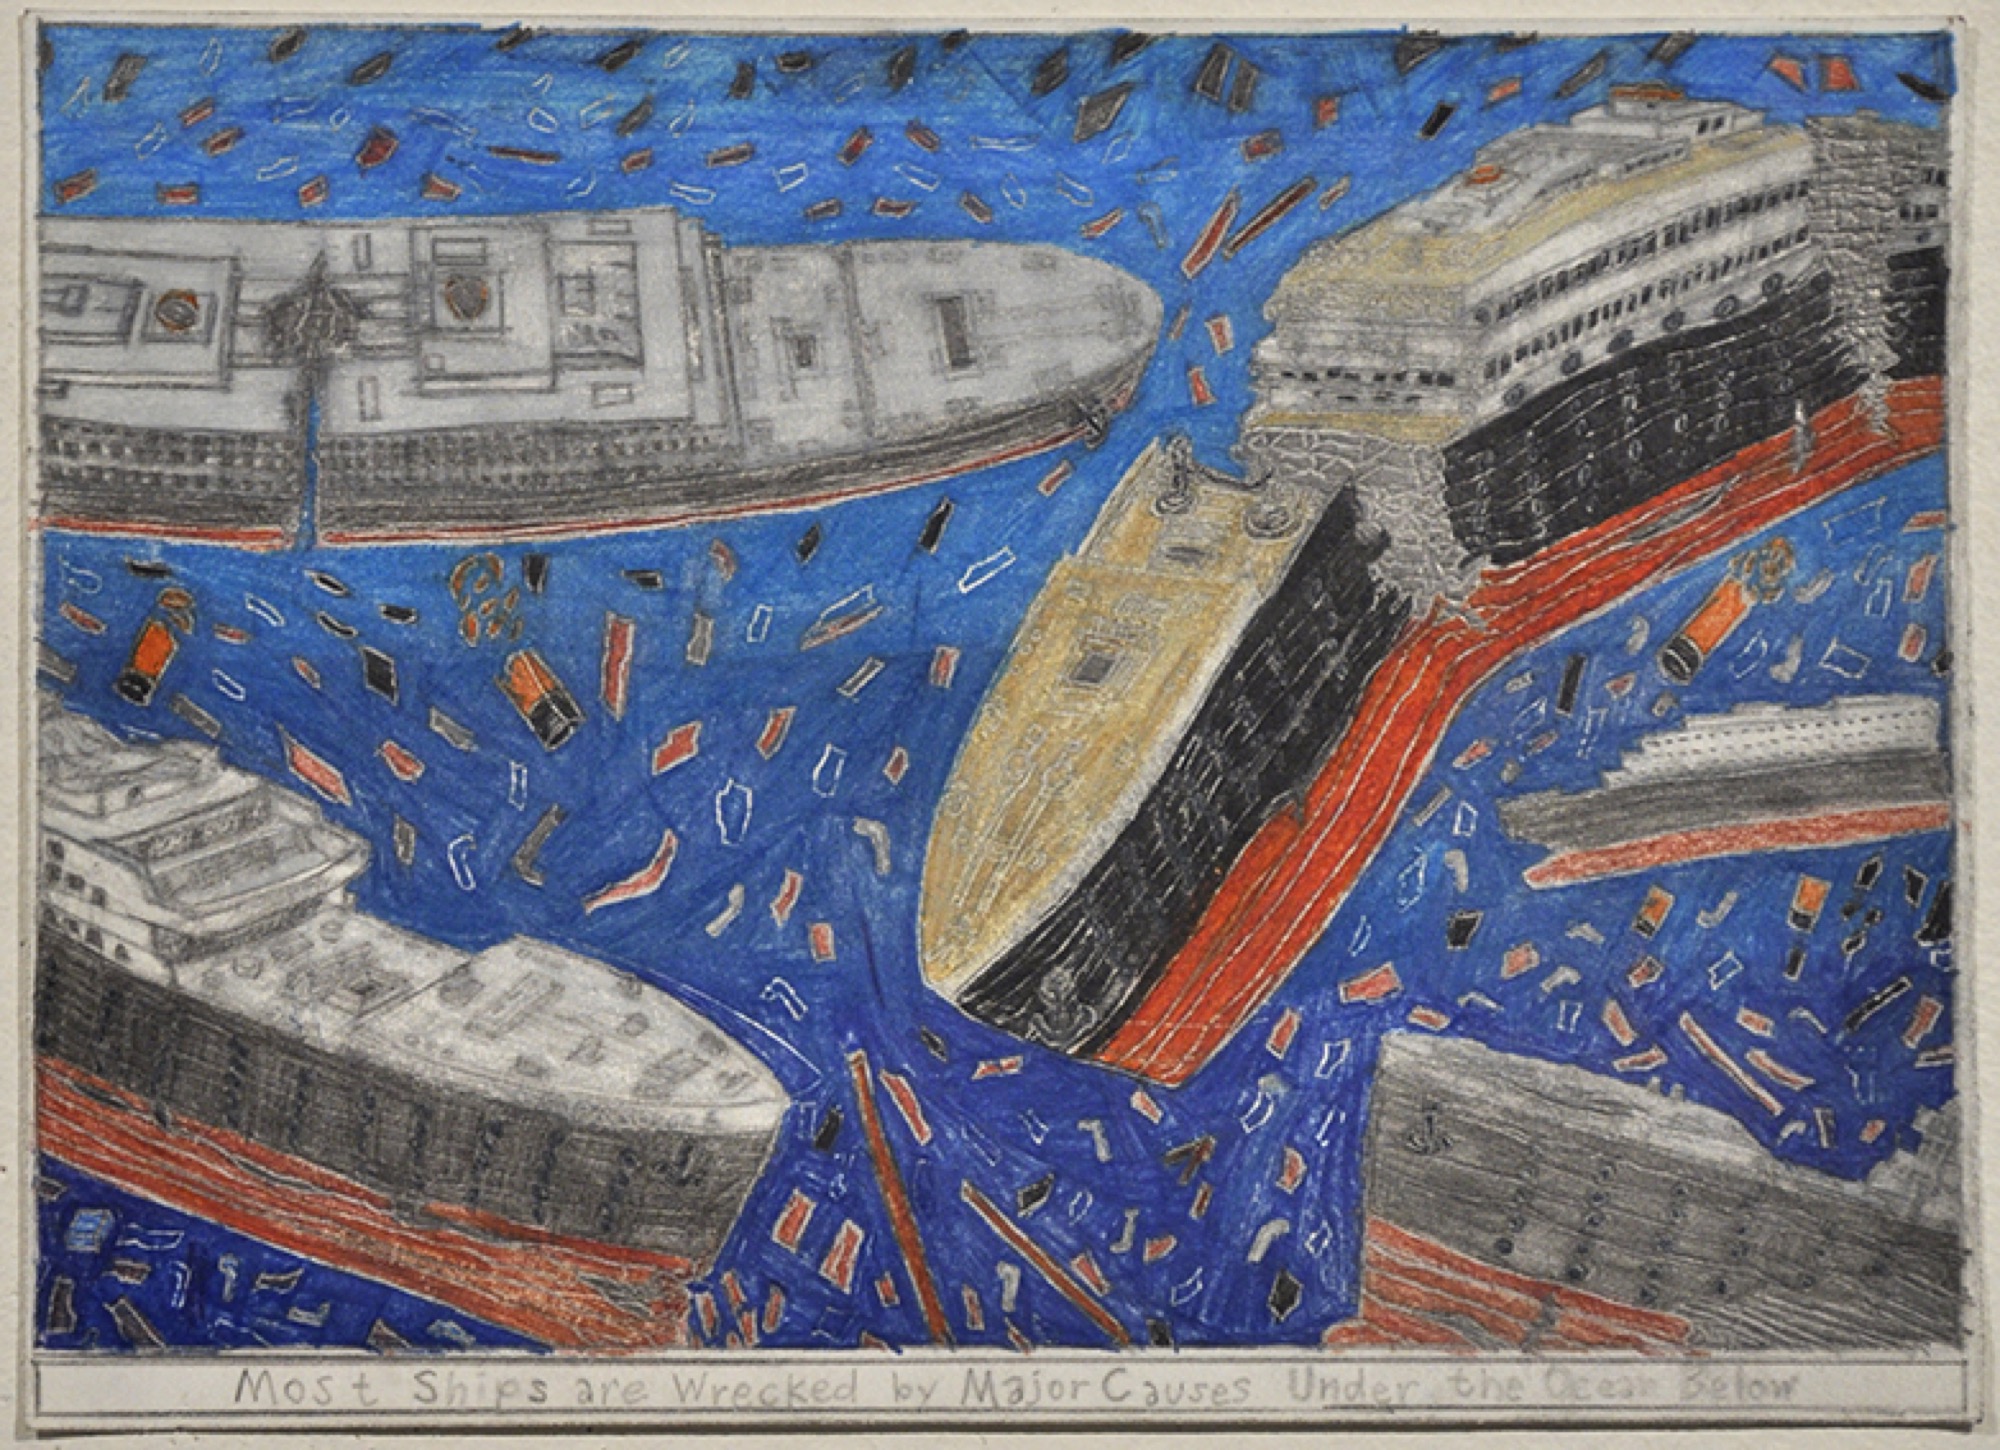 Samraing Chea, <em>Most Ships are Wrecked by Major Causes Under the Ocean Below</em>, 2013, pencil on paper, 28 × 38 cm. Private collection. Photo: Andrew Curtis.